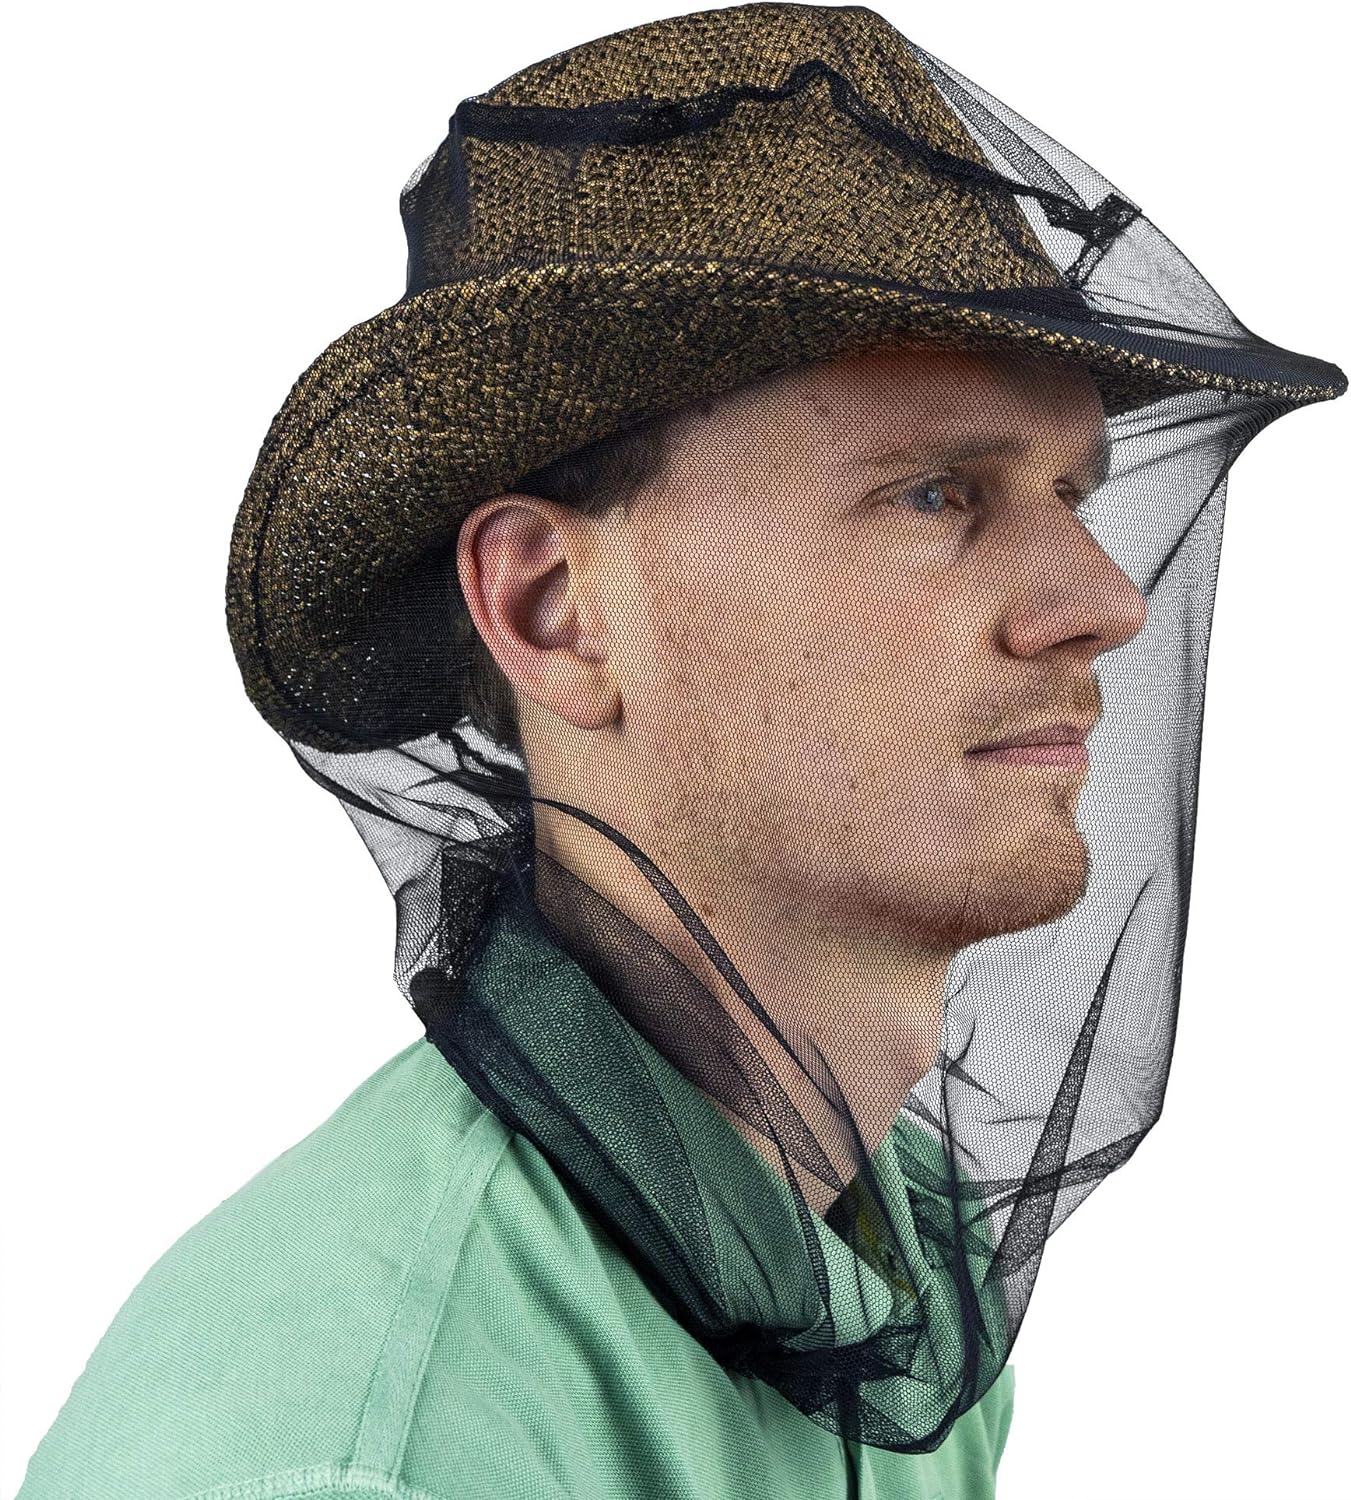 Mosquito Head Net for Insect, Fly & Bug Protection - Quality Mesh Netting for Travel, Camping, Gardening, Safari & Fishing - Fits All Type of Hats for Men & Women Black